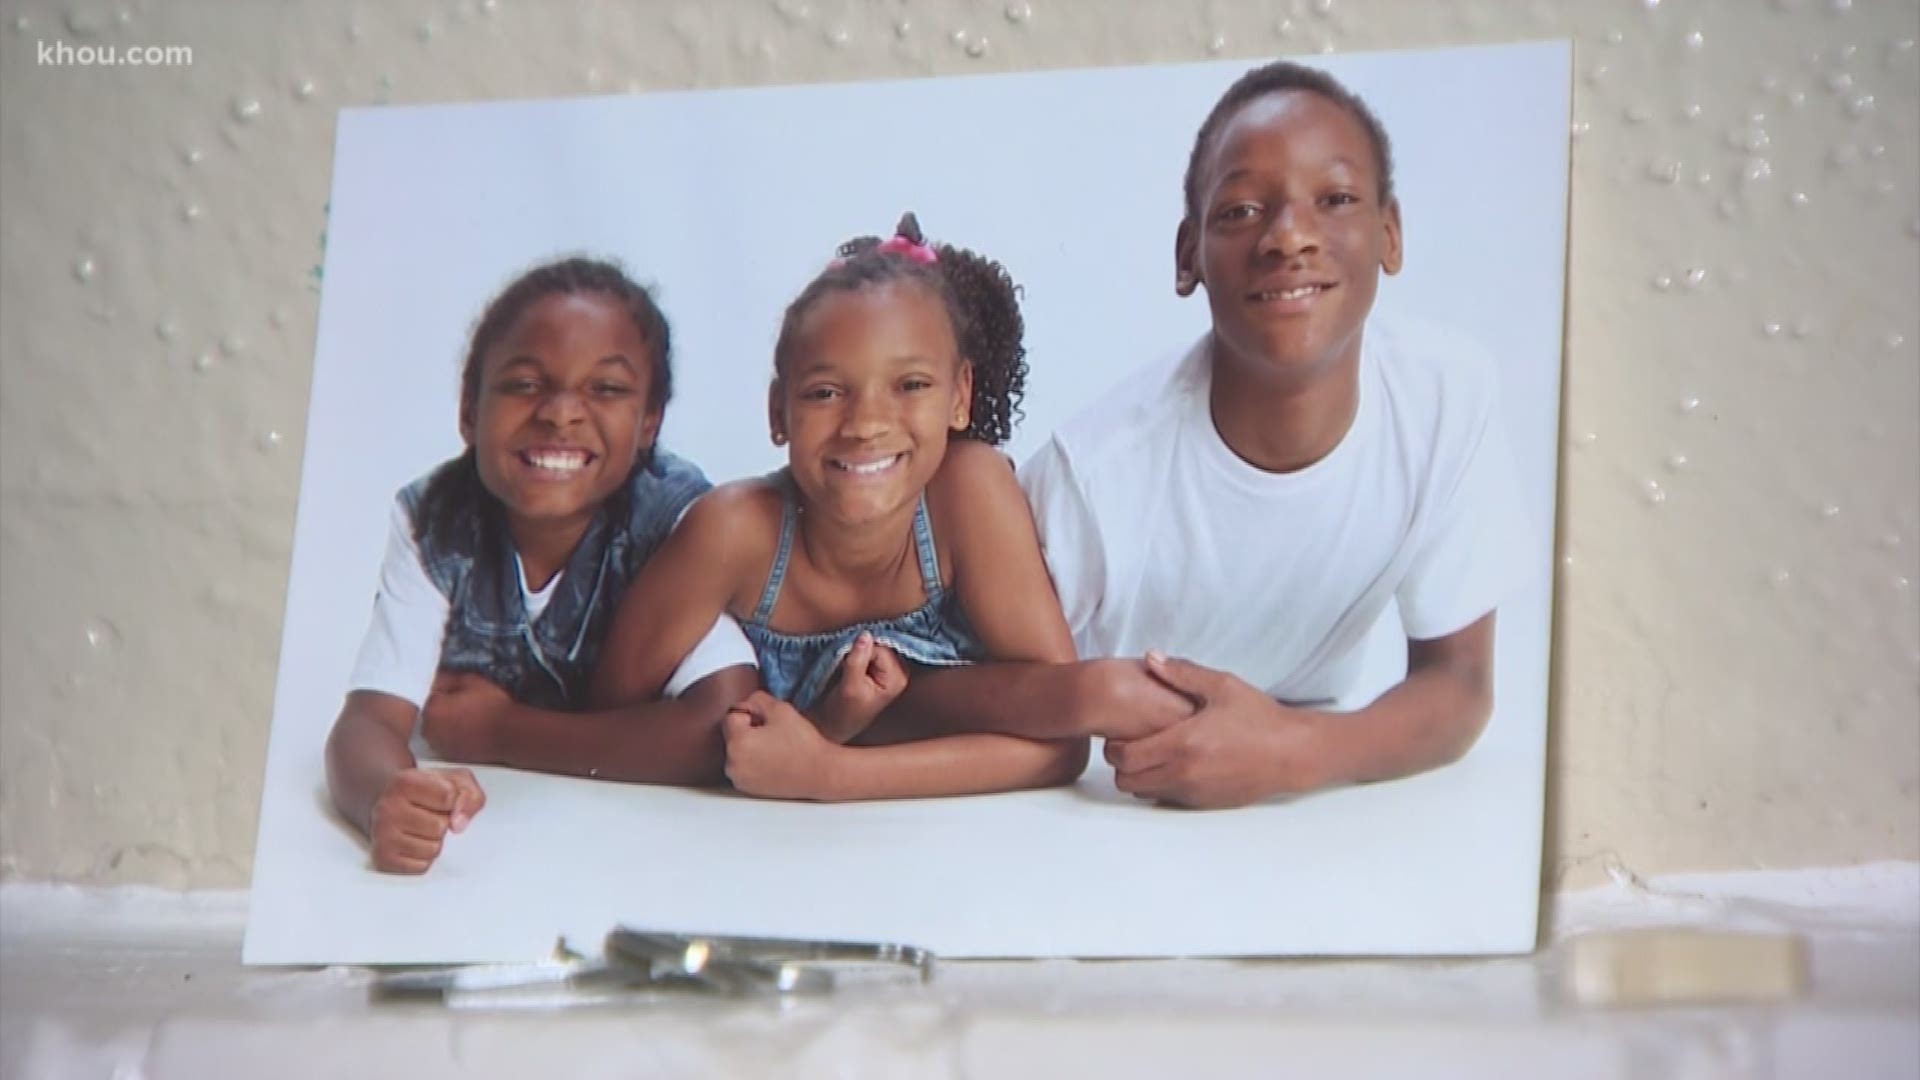 The mother who watched three of her children drown in front of her weeks ago on Sylvan Beach in La Porte says it happened in matter of seconds. Sandy Hunter says one moment her kids were standing waste deep in the water, the next they had been swept off their feet by a wave. Seven-year-old Zyon, 10-year-old Zakai and 13-year-old Za’nia all drowned.